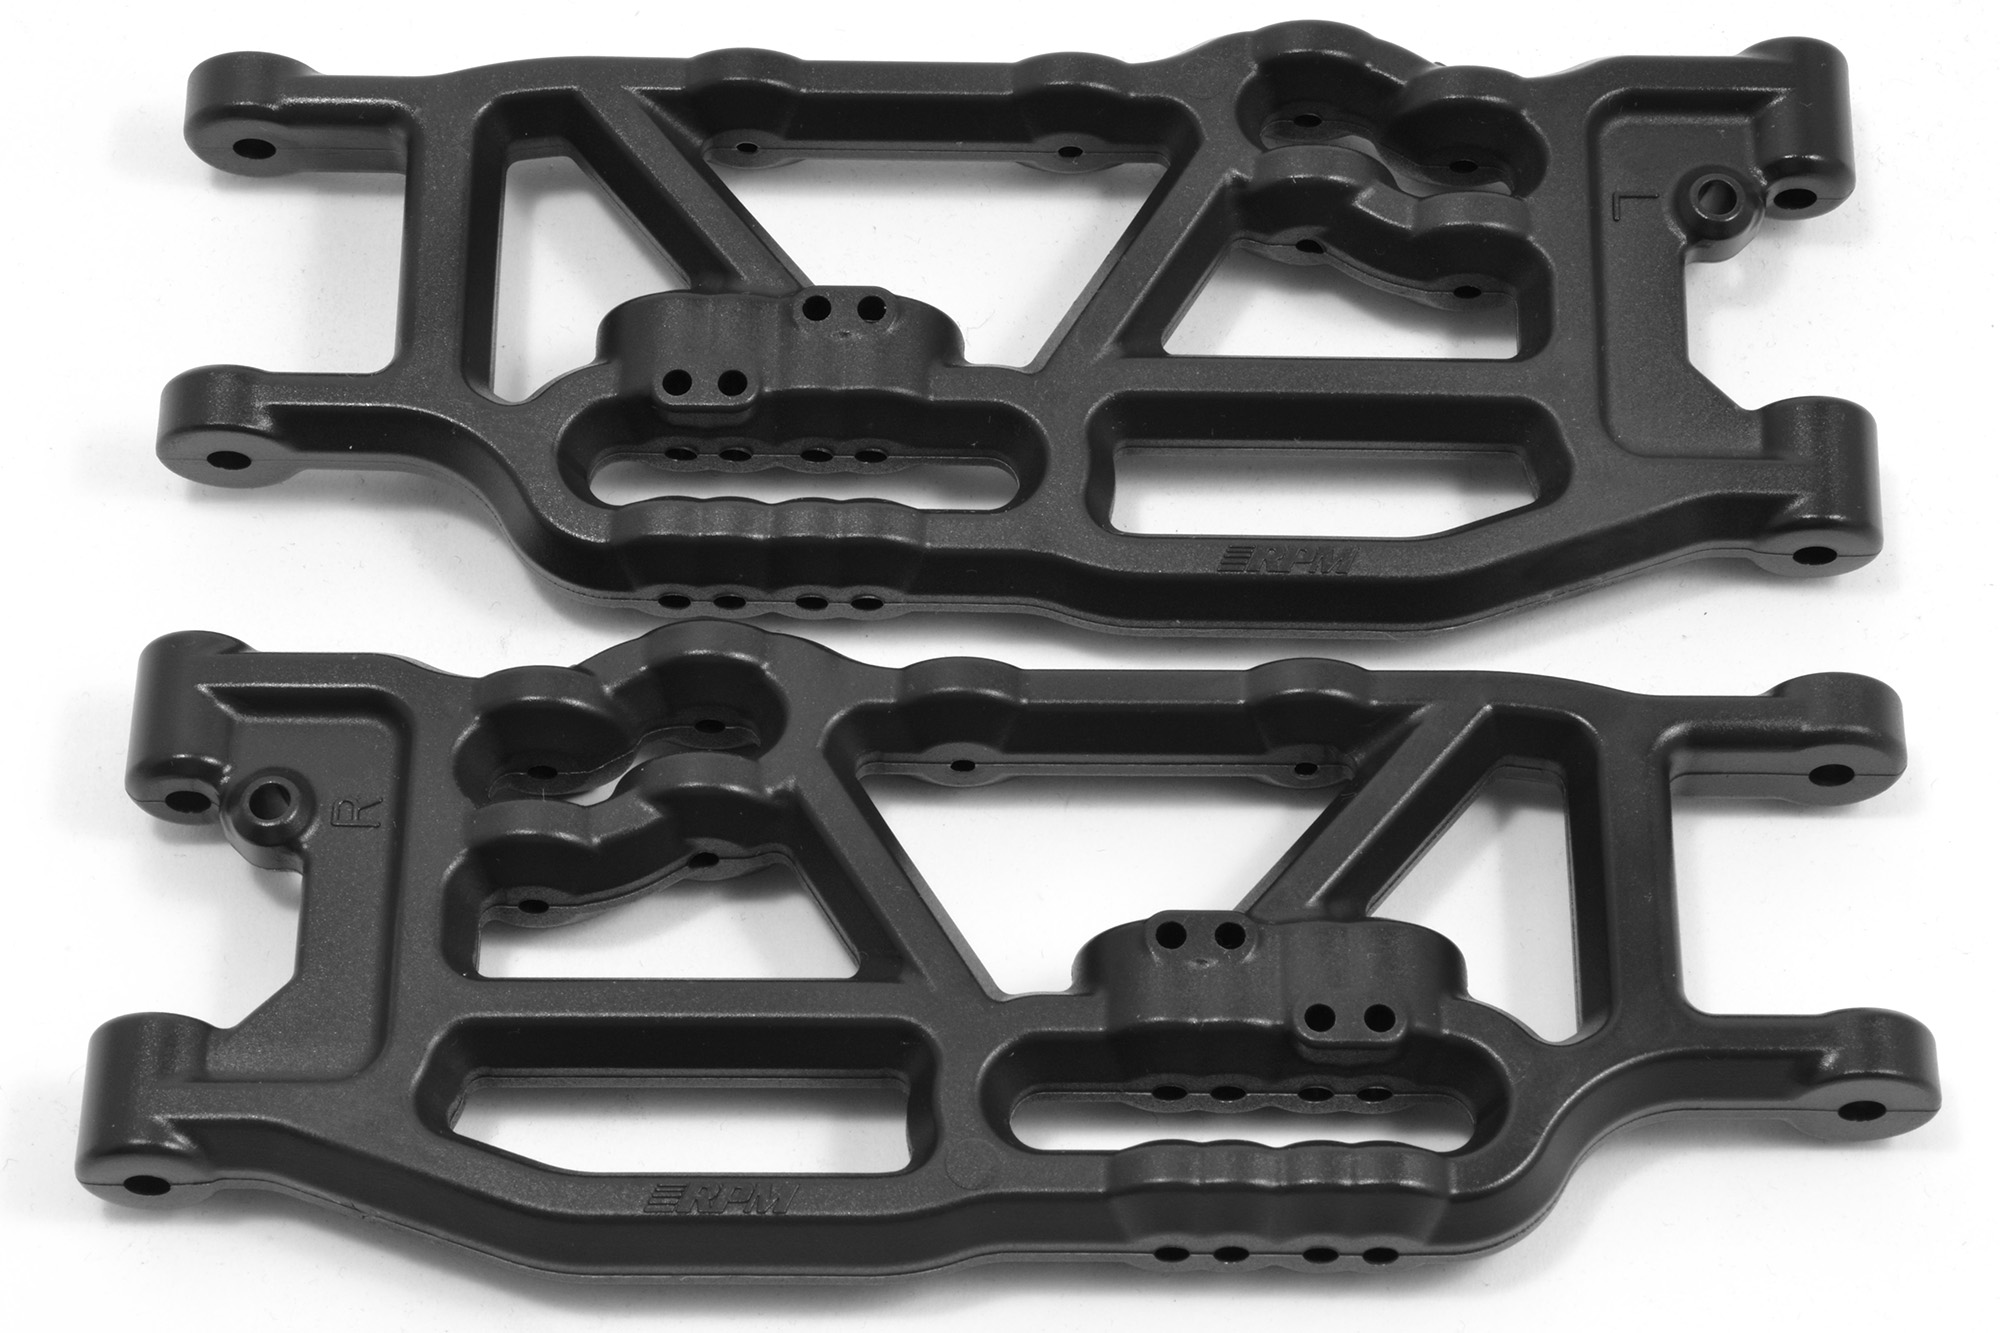 RPM Rear A-arms for Arrma Kraton, Outcast, Notorious, Fireteam and Talion